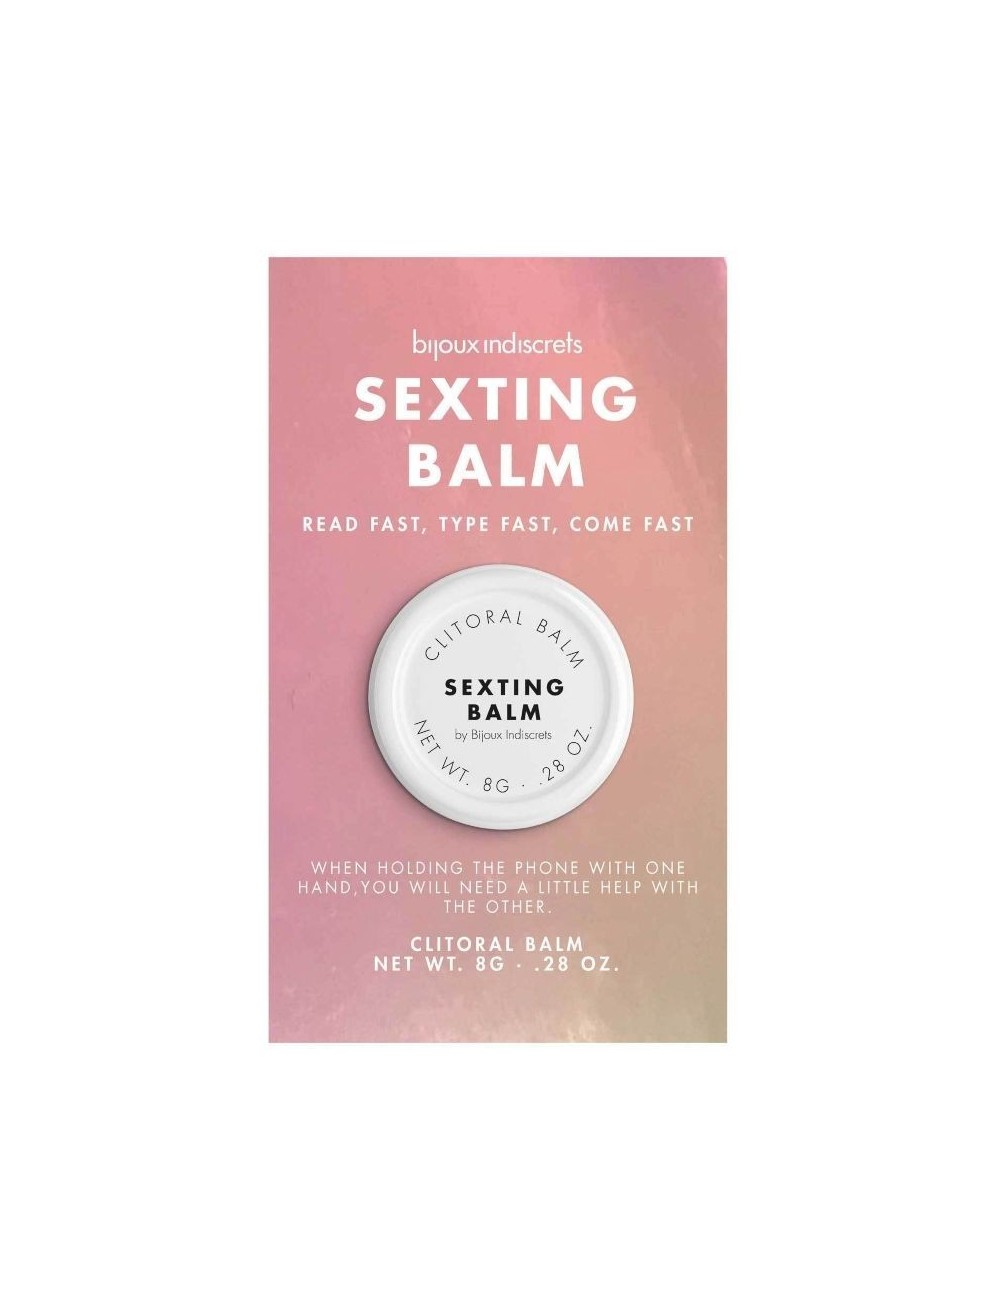 BAUME SEXTING CLITERAPHY CLIT BALSAM - Aphrodisiaques - BIJOUX CLITHERAPY